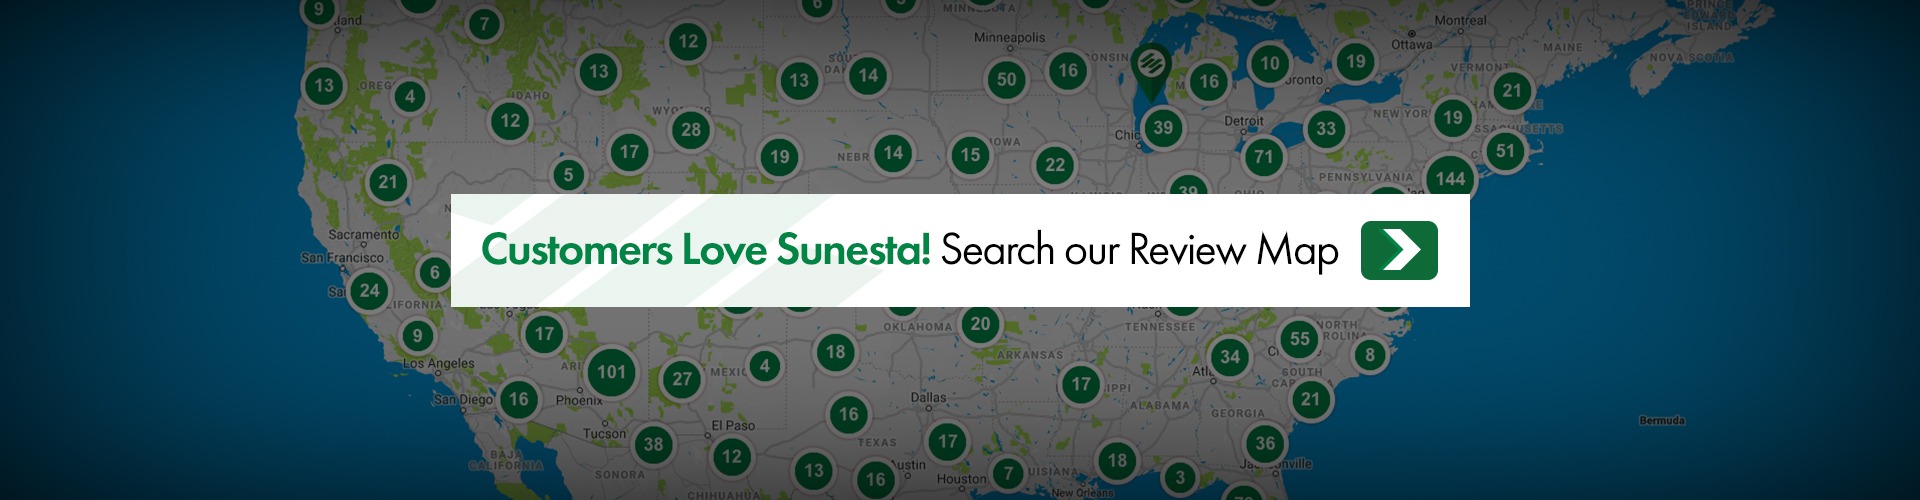 Search our Review Map